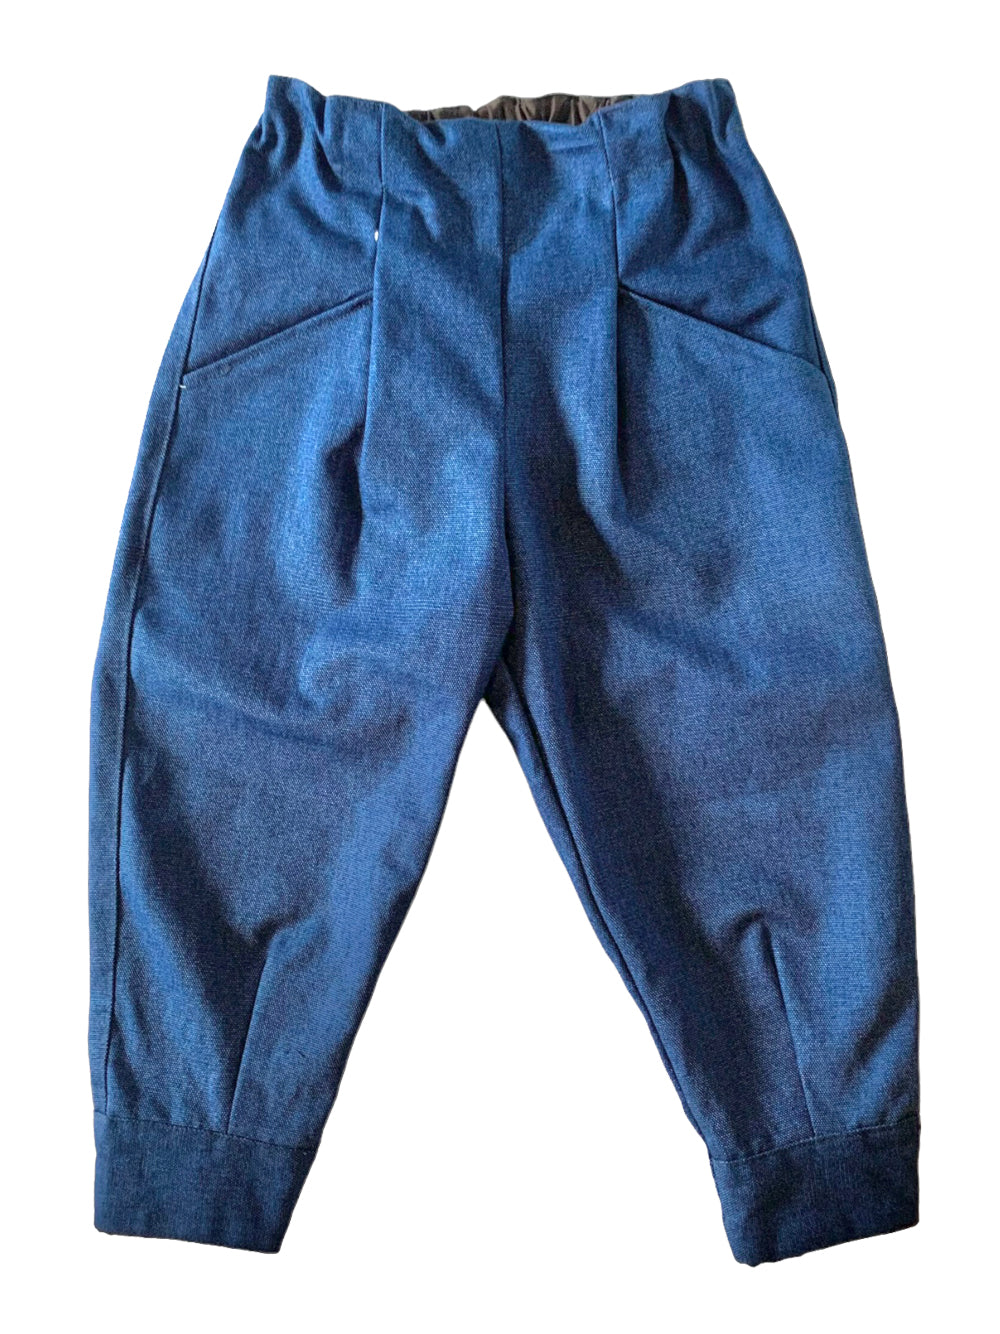 Oxford Fabric Trousers